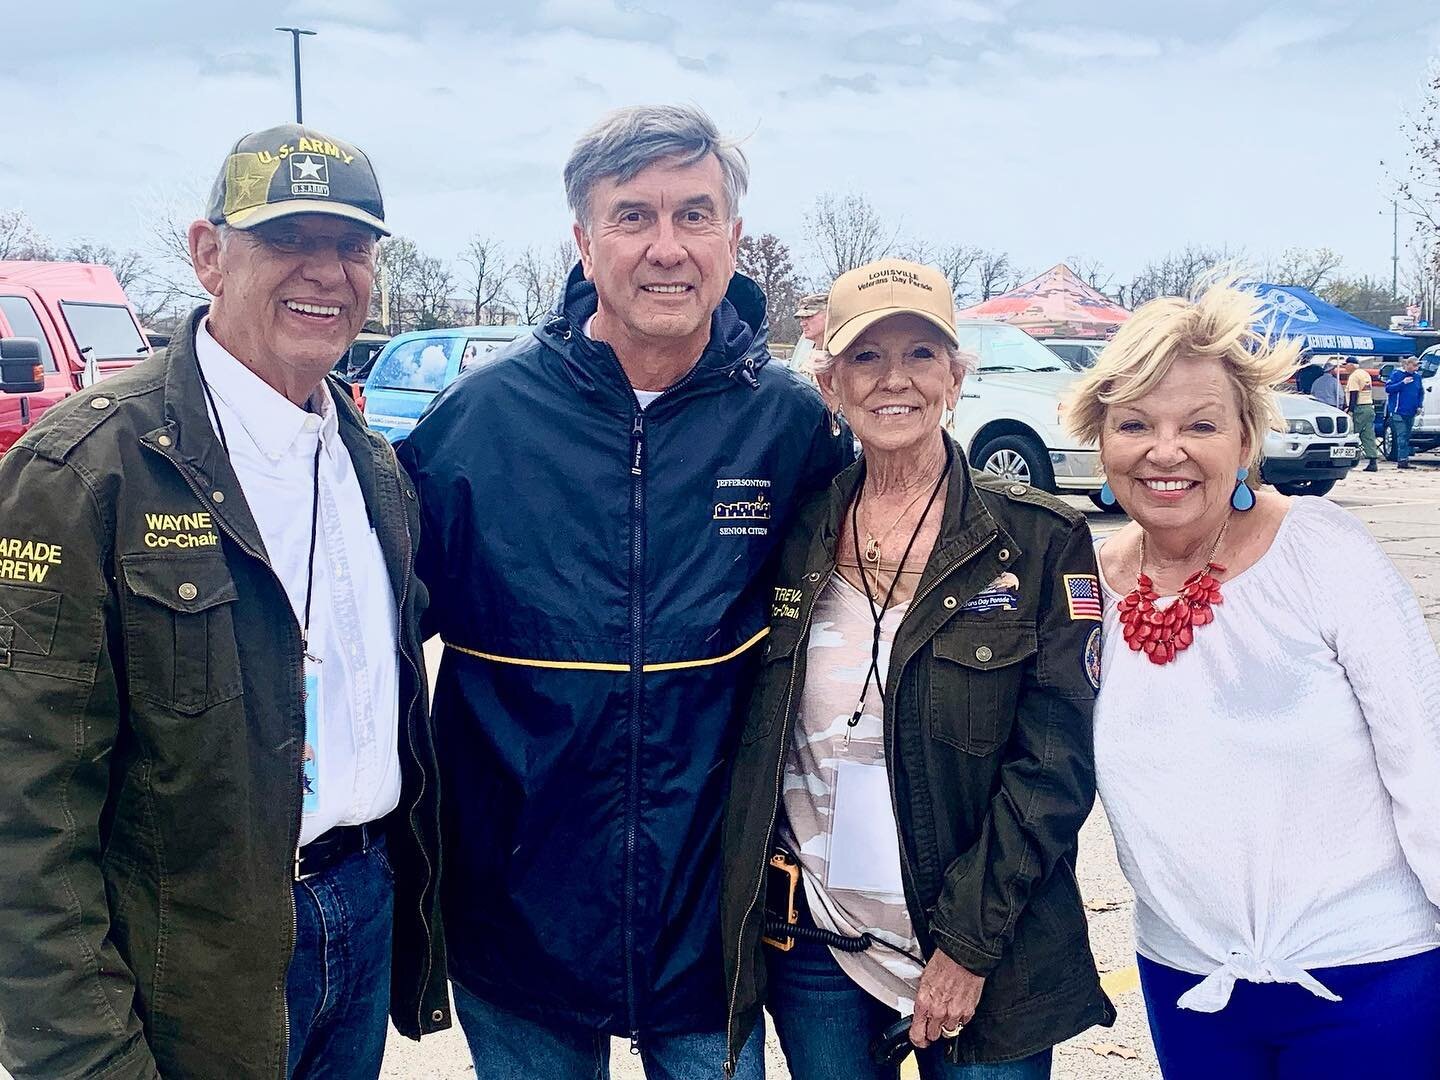 Celebrating veterans is something near and dear to me. Kudos to Southeast Christian Church and it partners and sponsors for putting on a really special event.

Families were able to enjoy and learn about the significance of military service &mdash; a